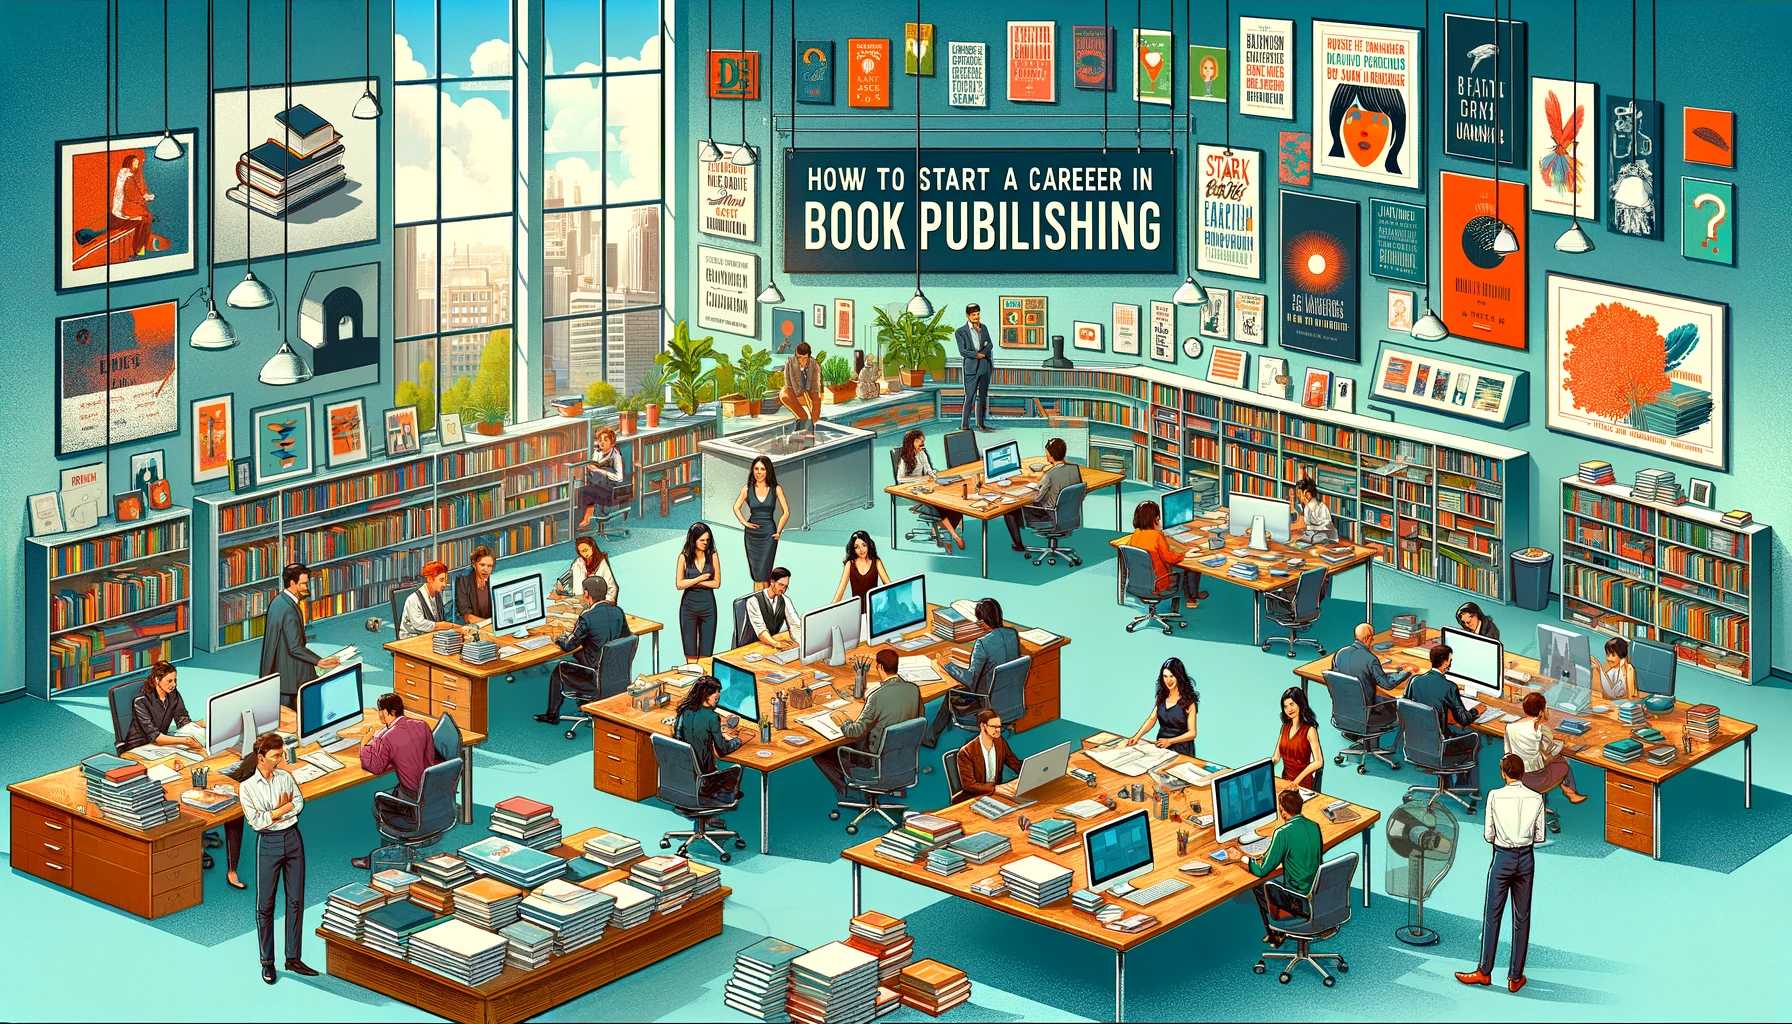 How to Start a Career in Book Publishing